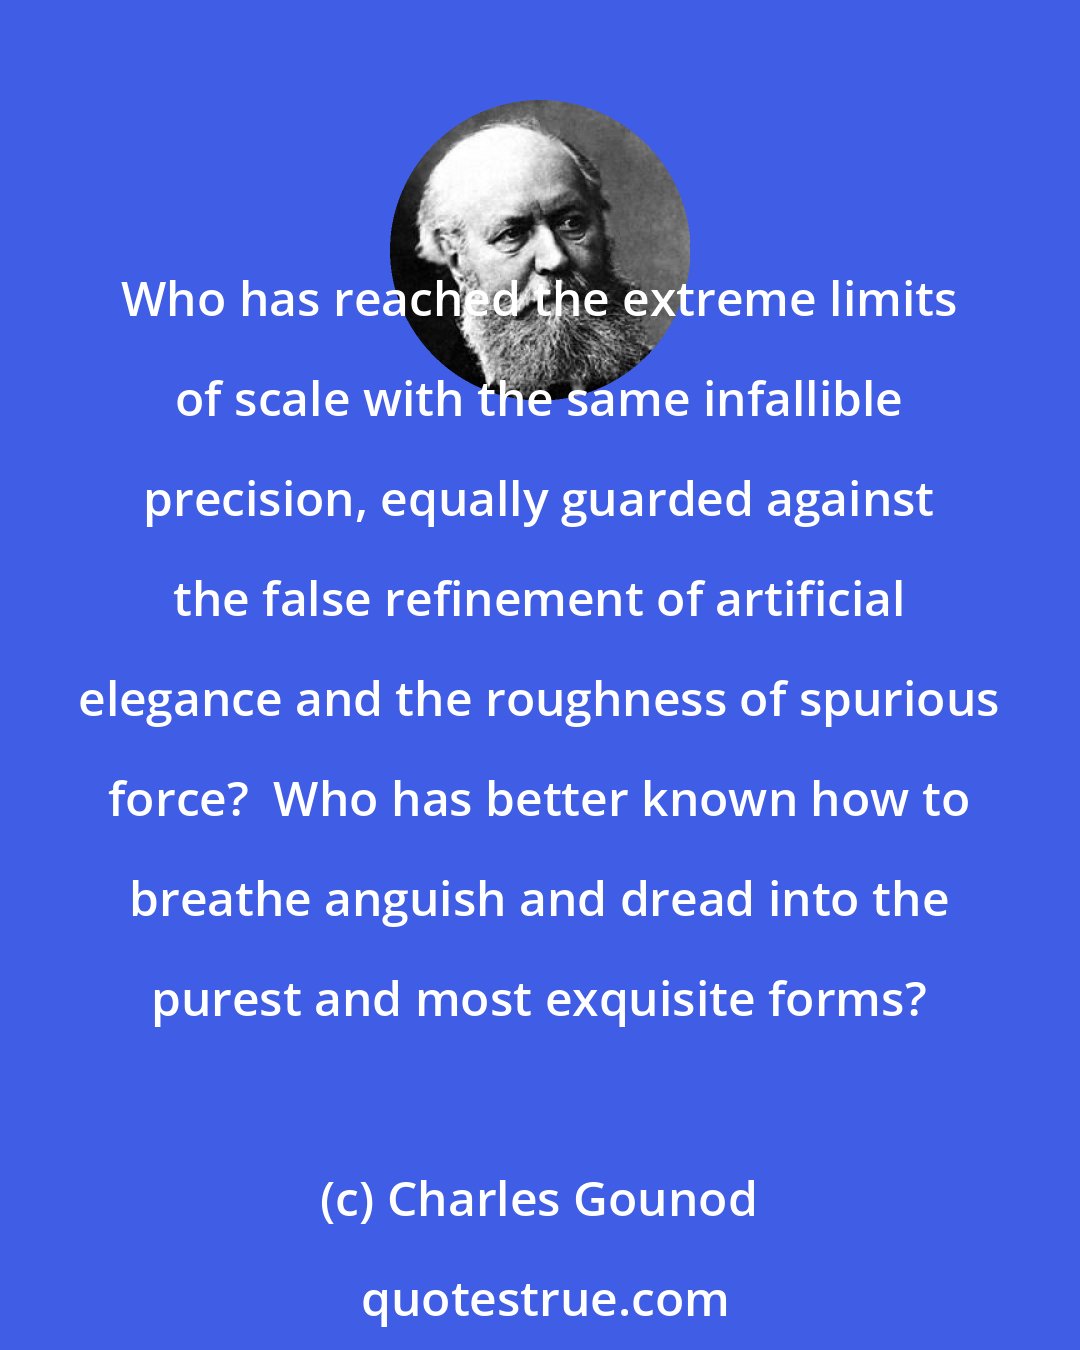 Charles Gounod: Who has reached the extreme limits of scale with the same infallible precision, equally guarded against the false refinement of artificial elegance and the roughness of spurious force?  Who has better known how to breathe anguish and dread into the purest and most exquisite forms?